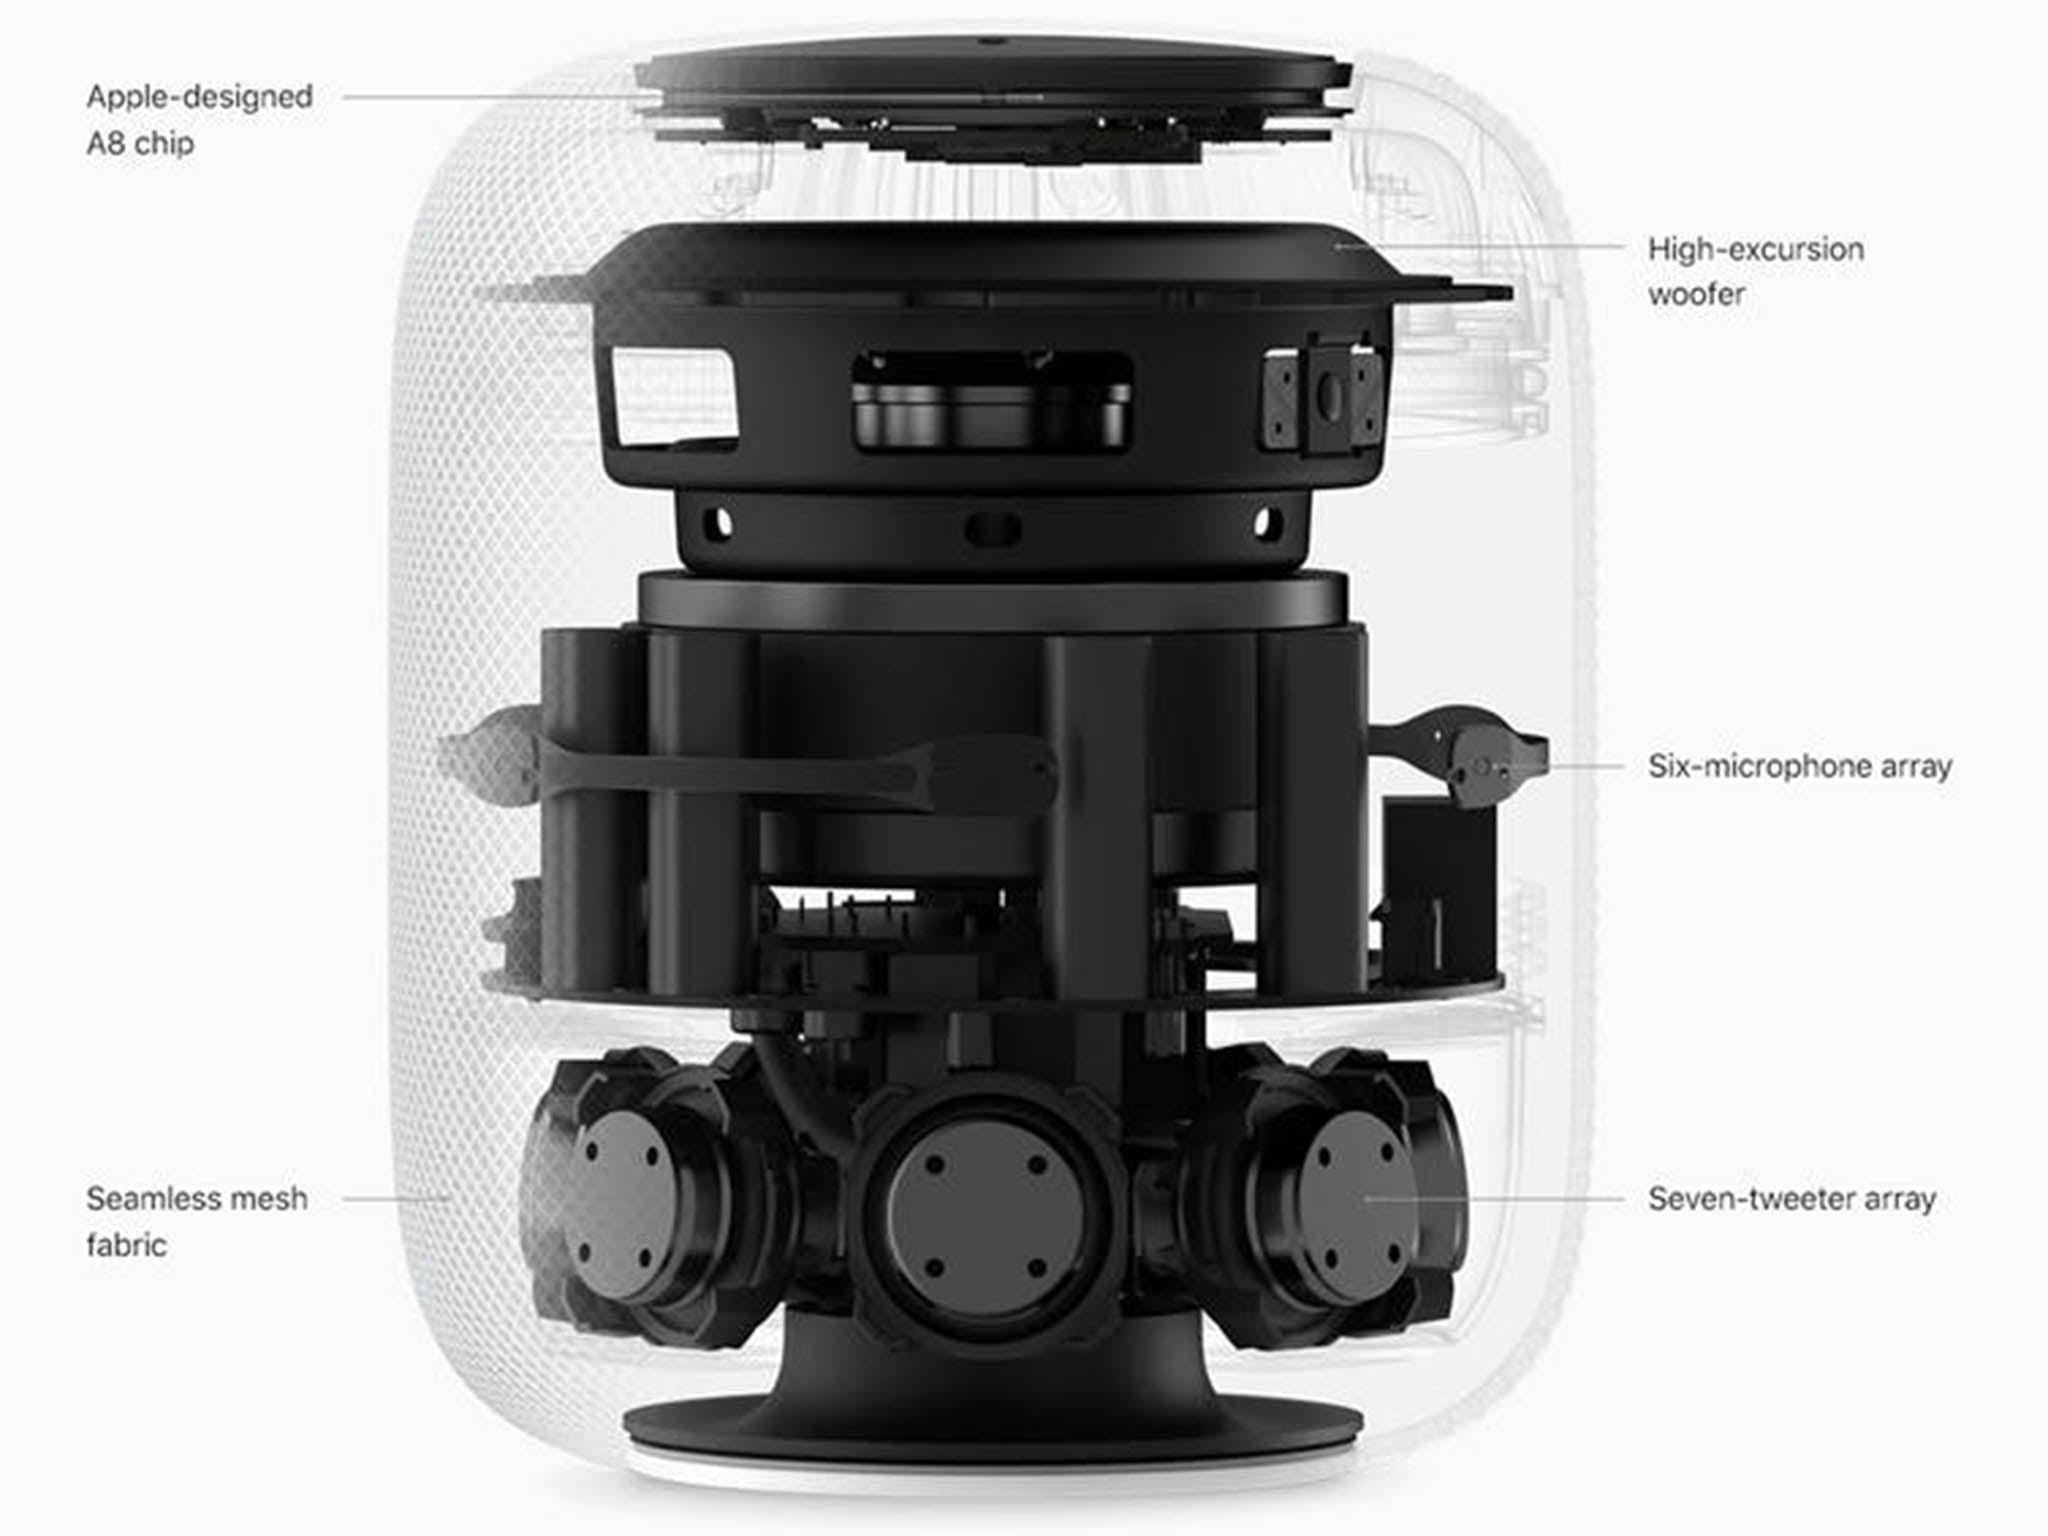 Apple's HomePod is an extremely good quality speaker, but it isn't that smart... yet